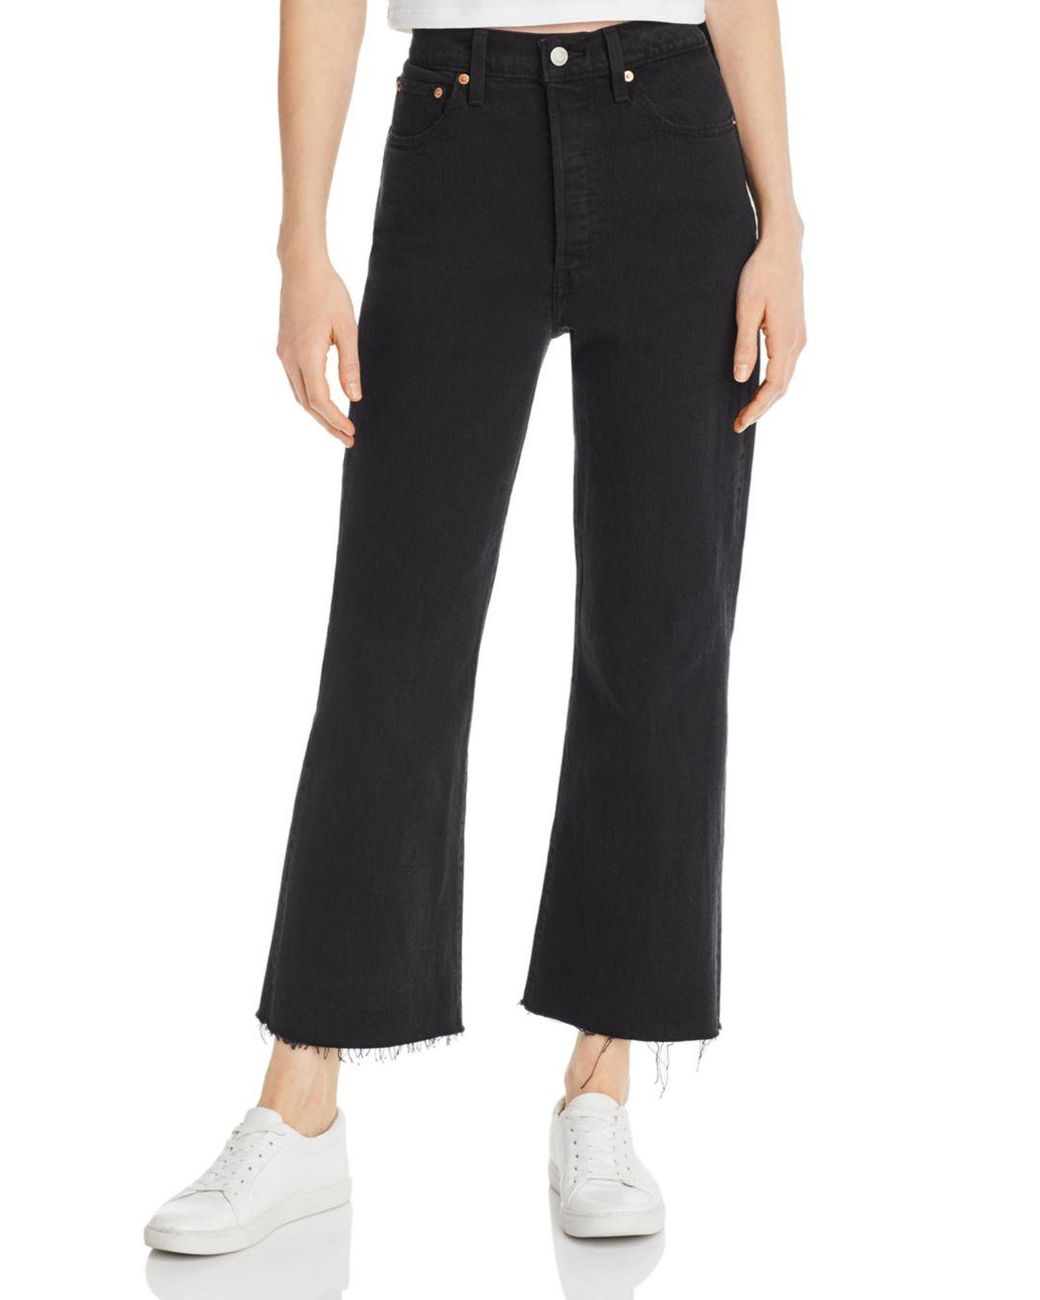 Levi's Denim Rib Cage Crop Flare Jeans In On The Rocks in Black - Lyst